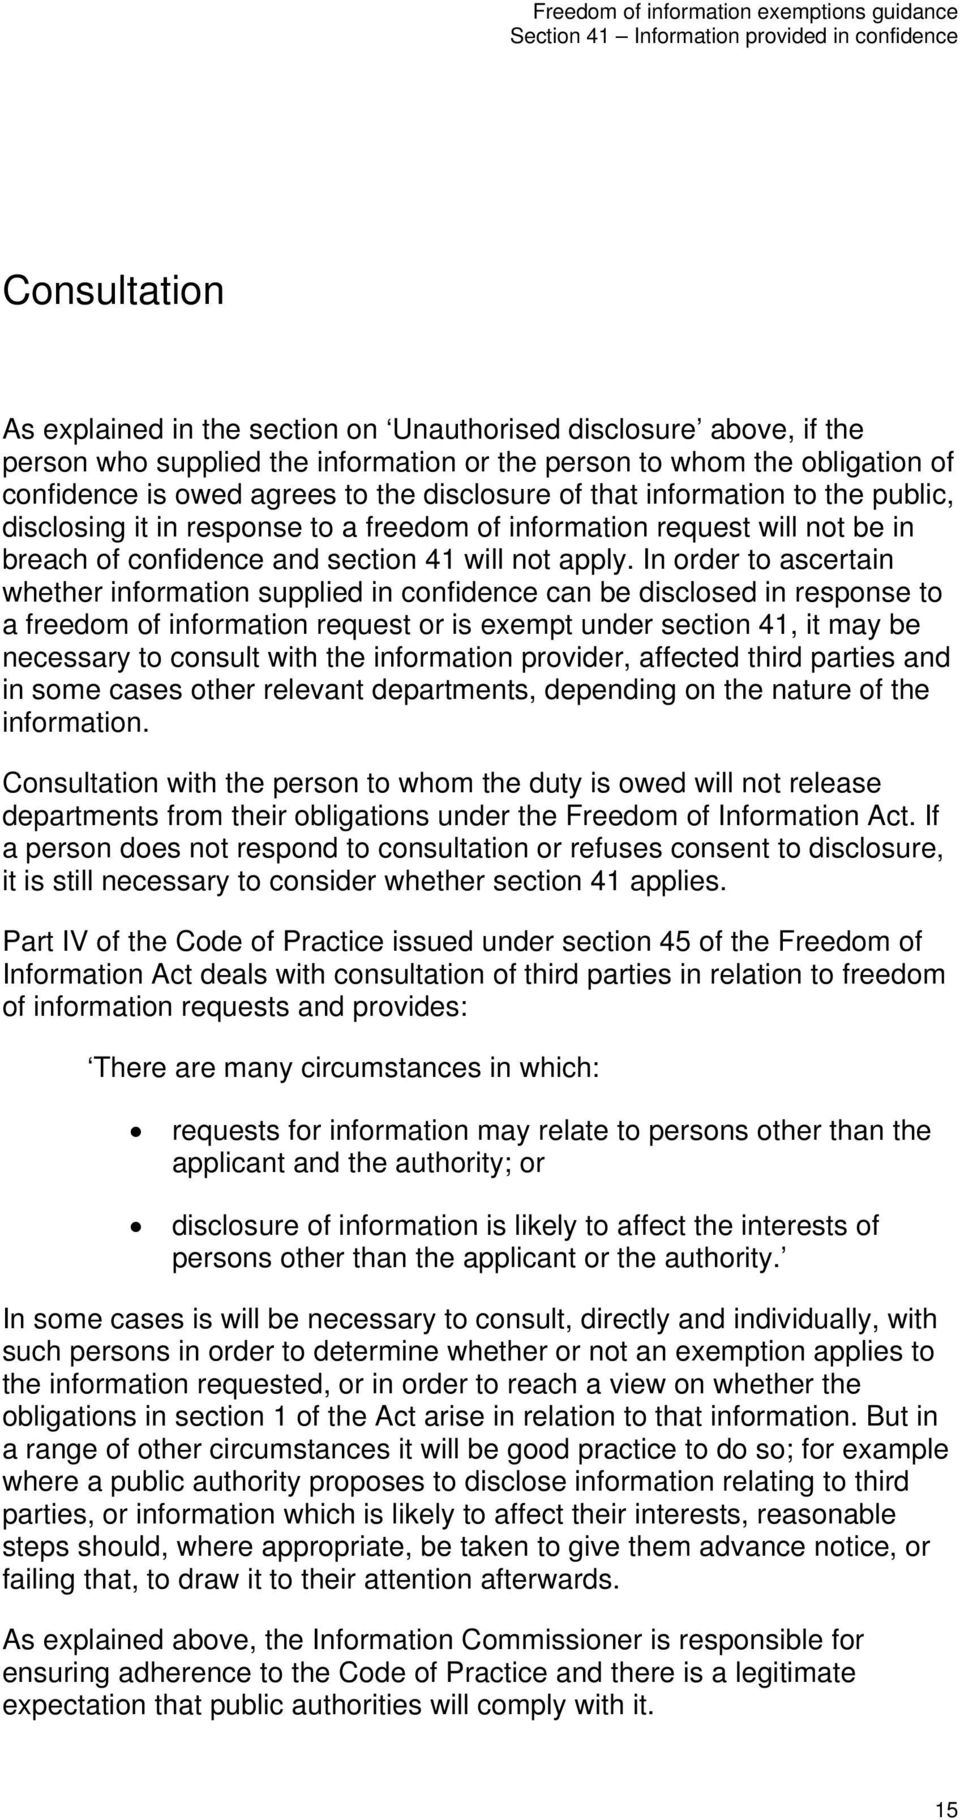 In order to ascertain whether information supplied in confidence can be disclosed in response to a freedom of information request or is exempt under section 41, it may be necessary to consult with